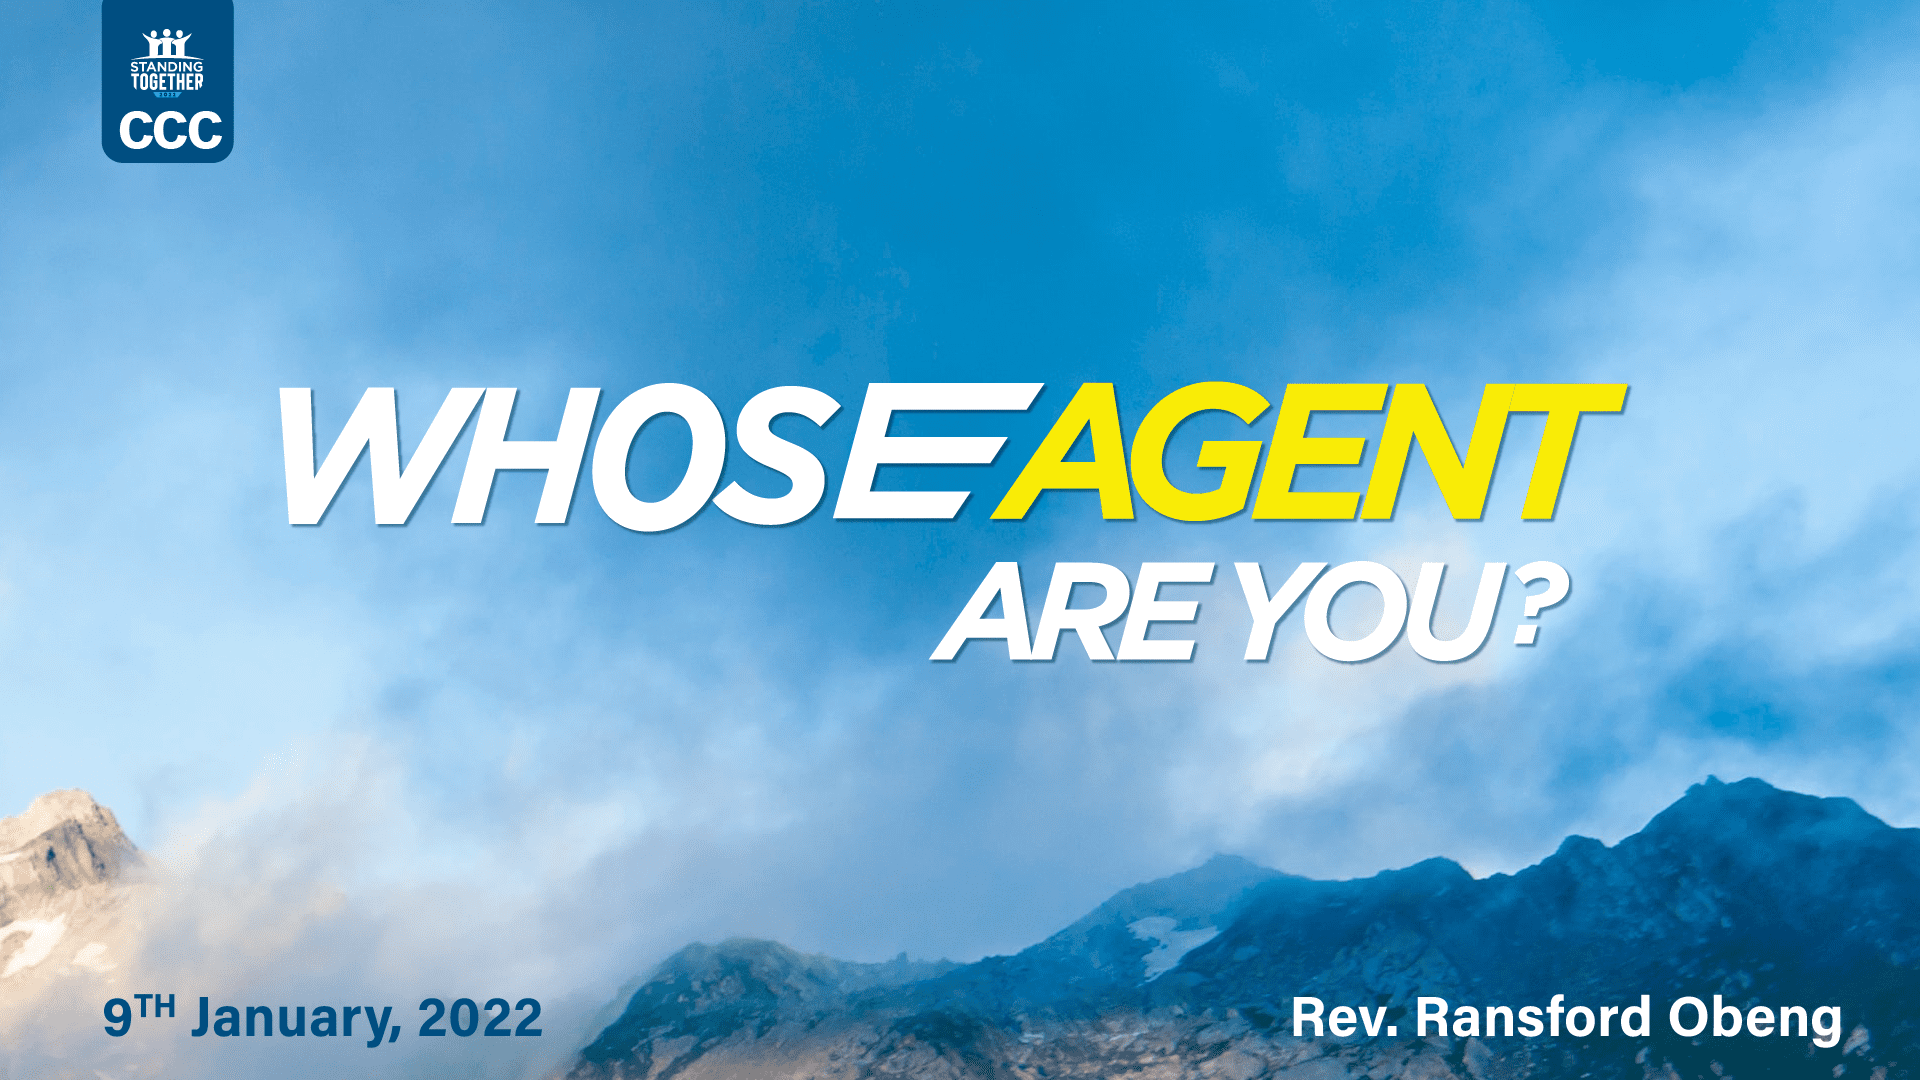 WHOSE AGENT ARE YOU?